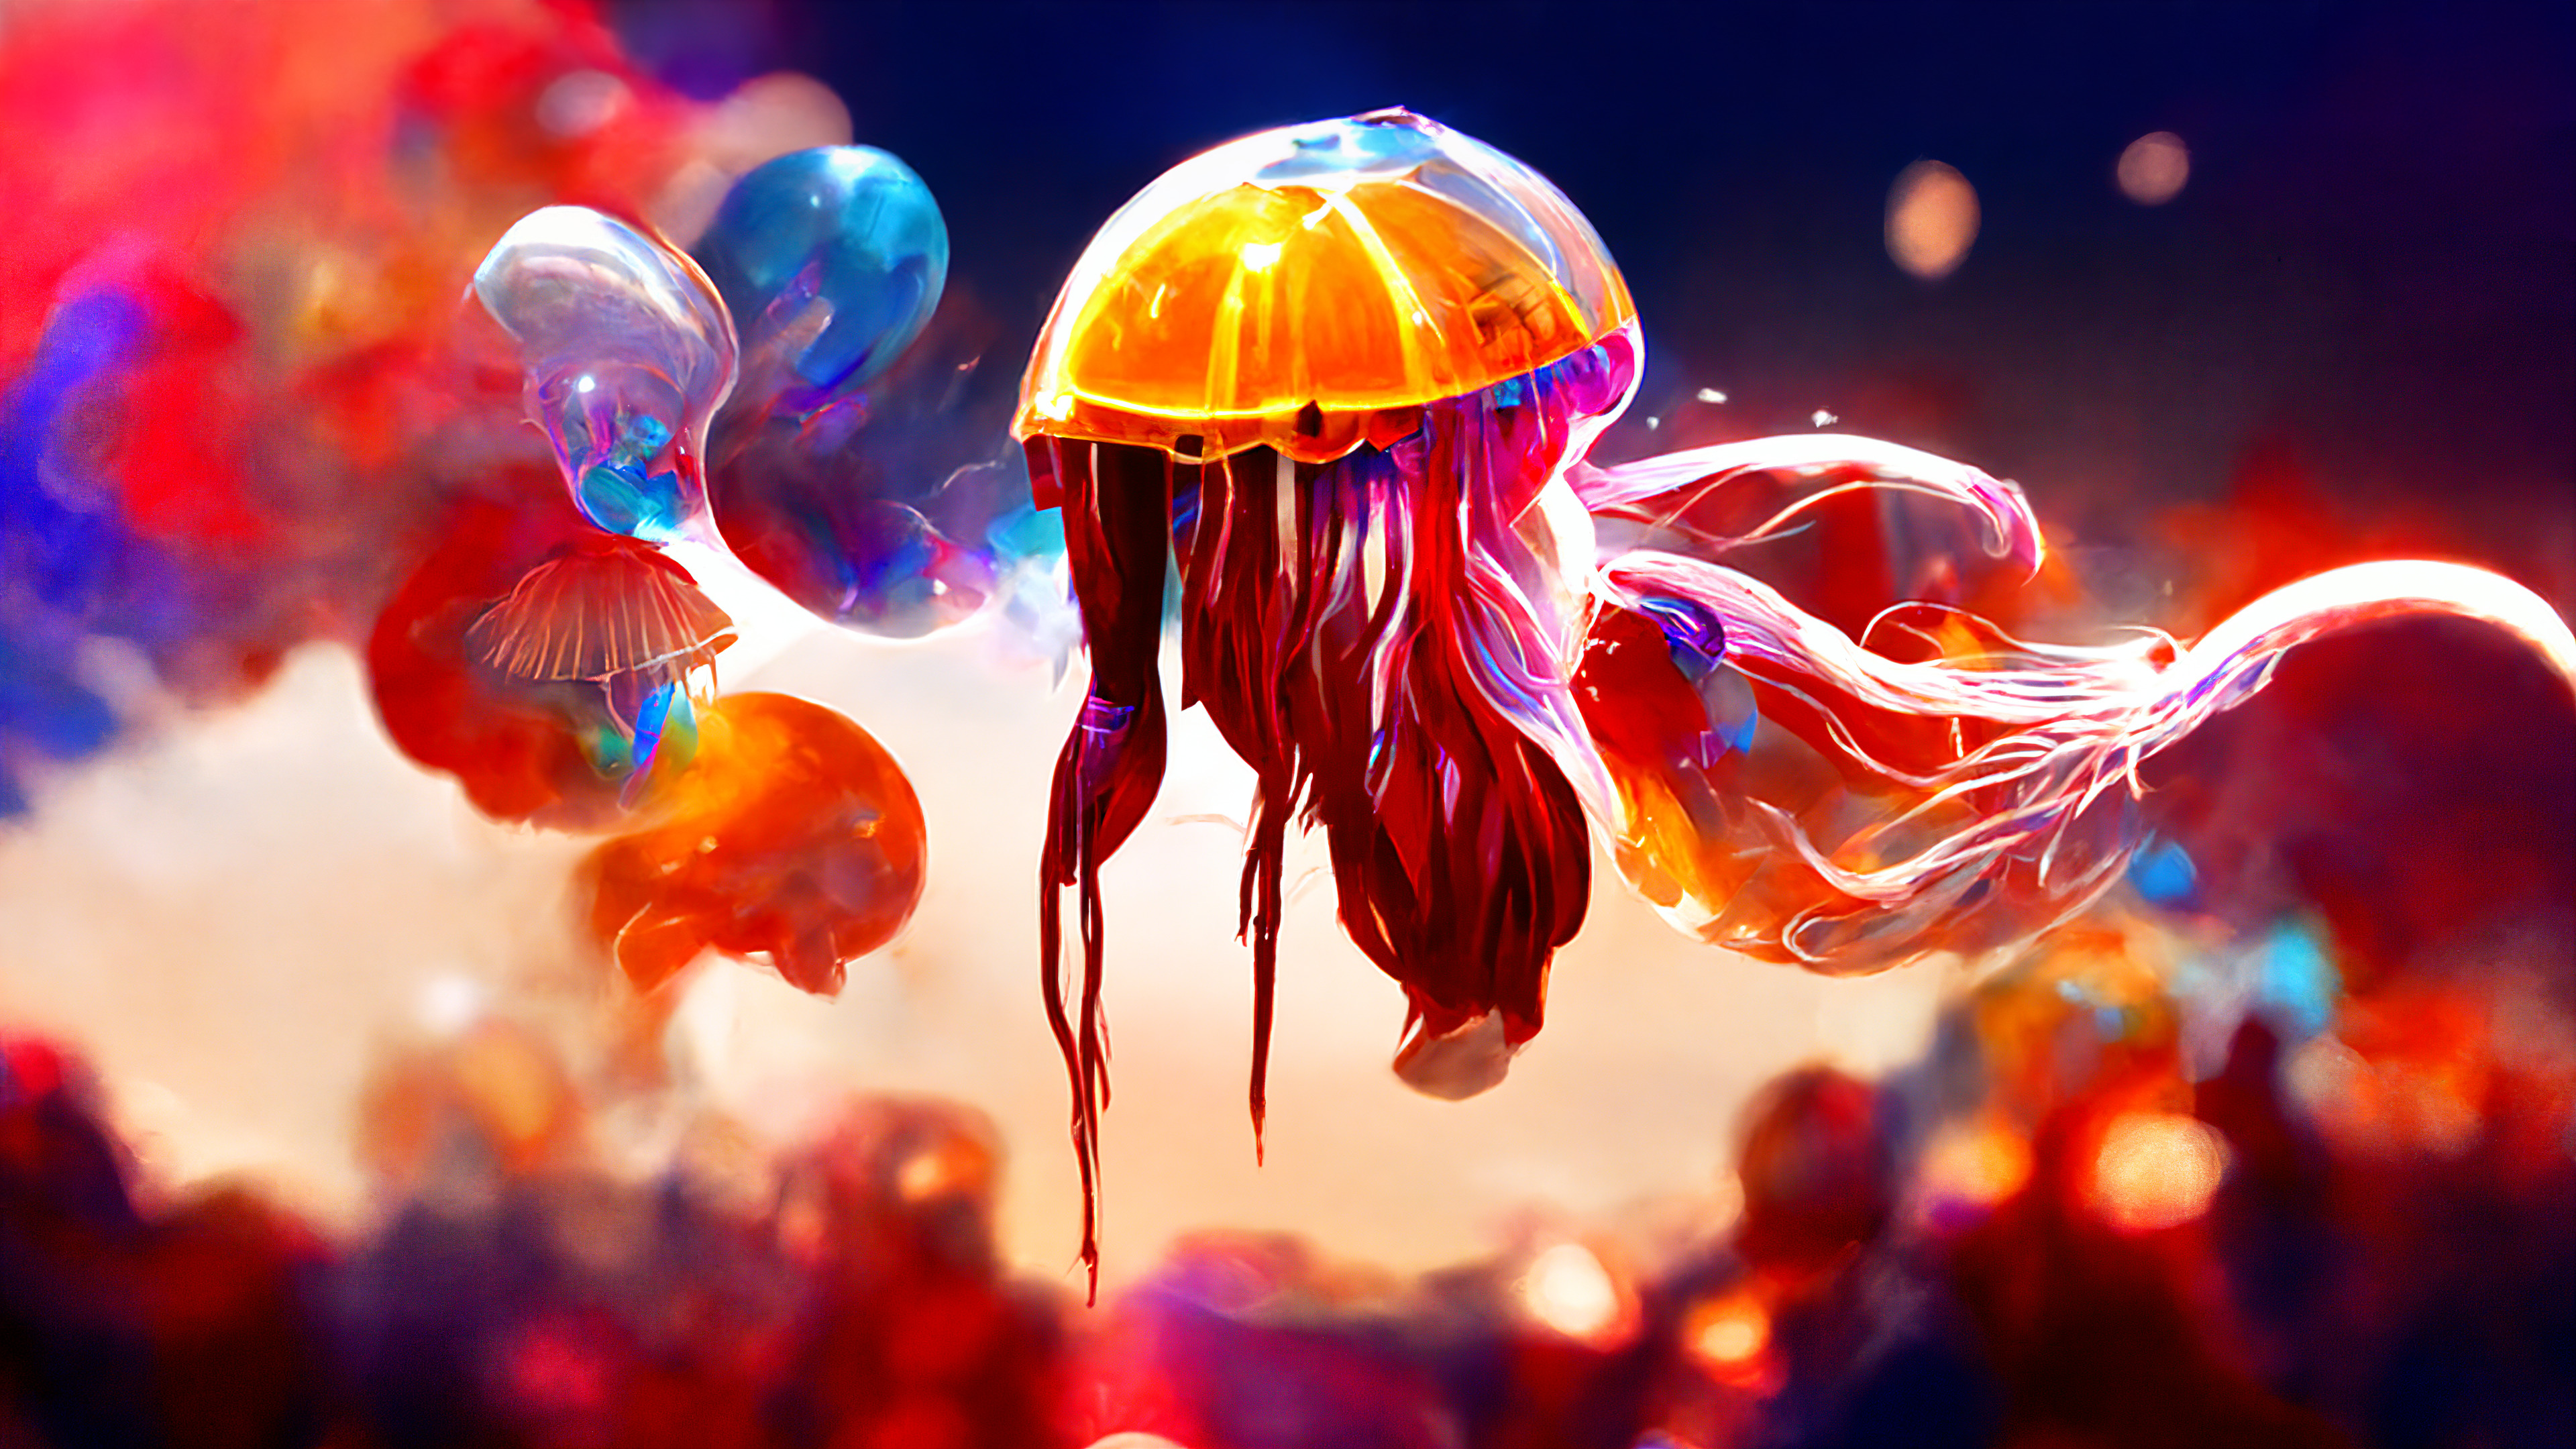 Martin Wimpress for voting ❤ Jammy Jellyfish 3 & 4 came out on top, but I'll also include 6 for those who prefer a lighter wallpaper. Thanks again